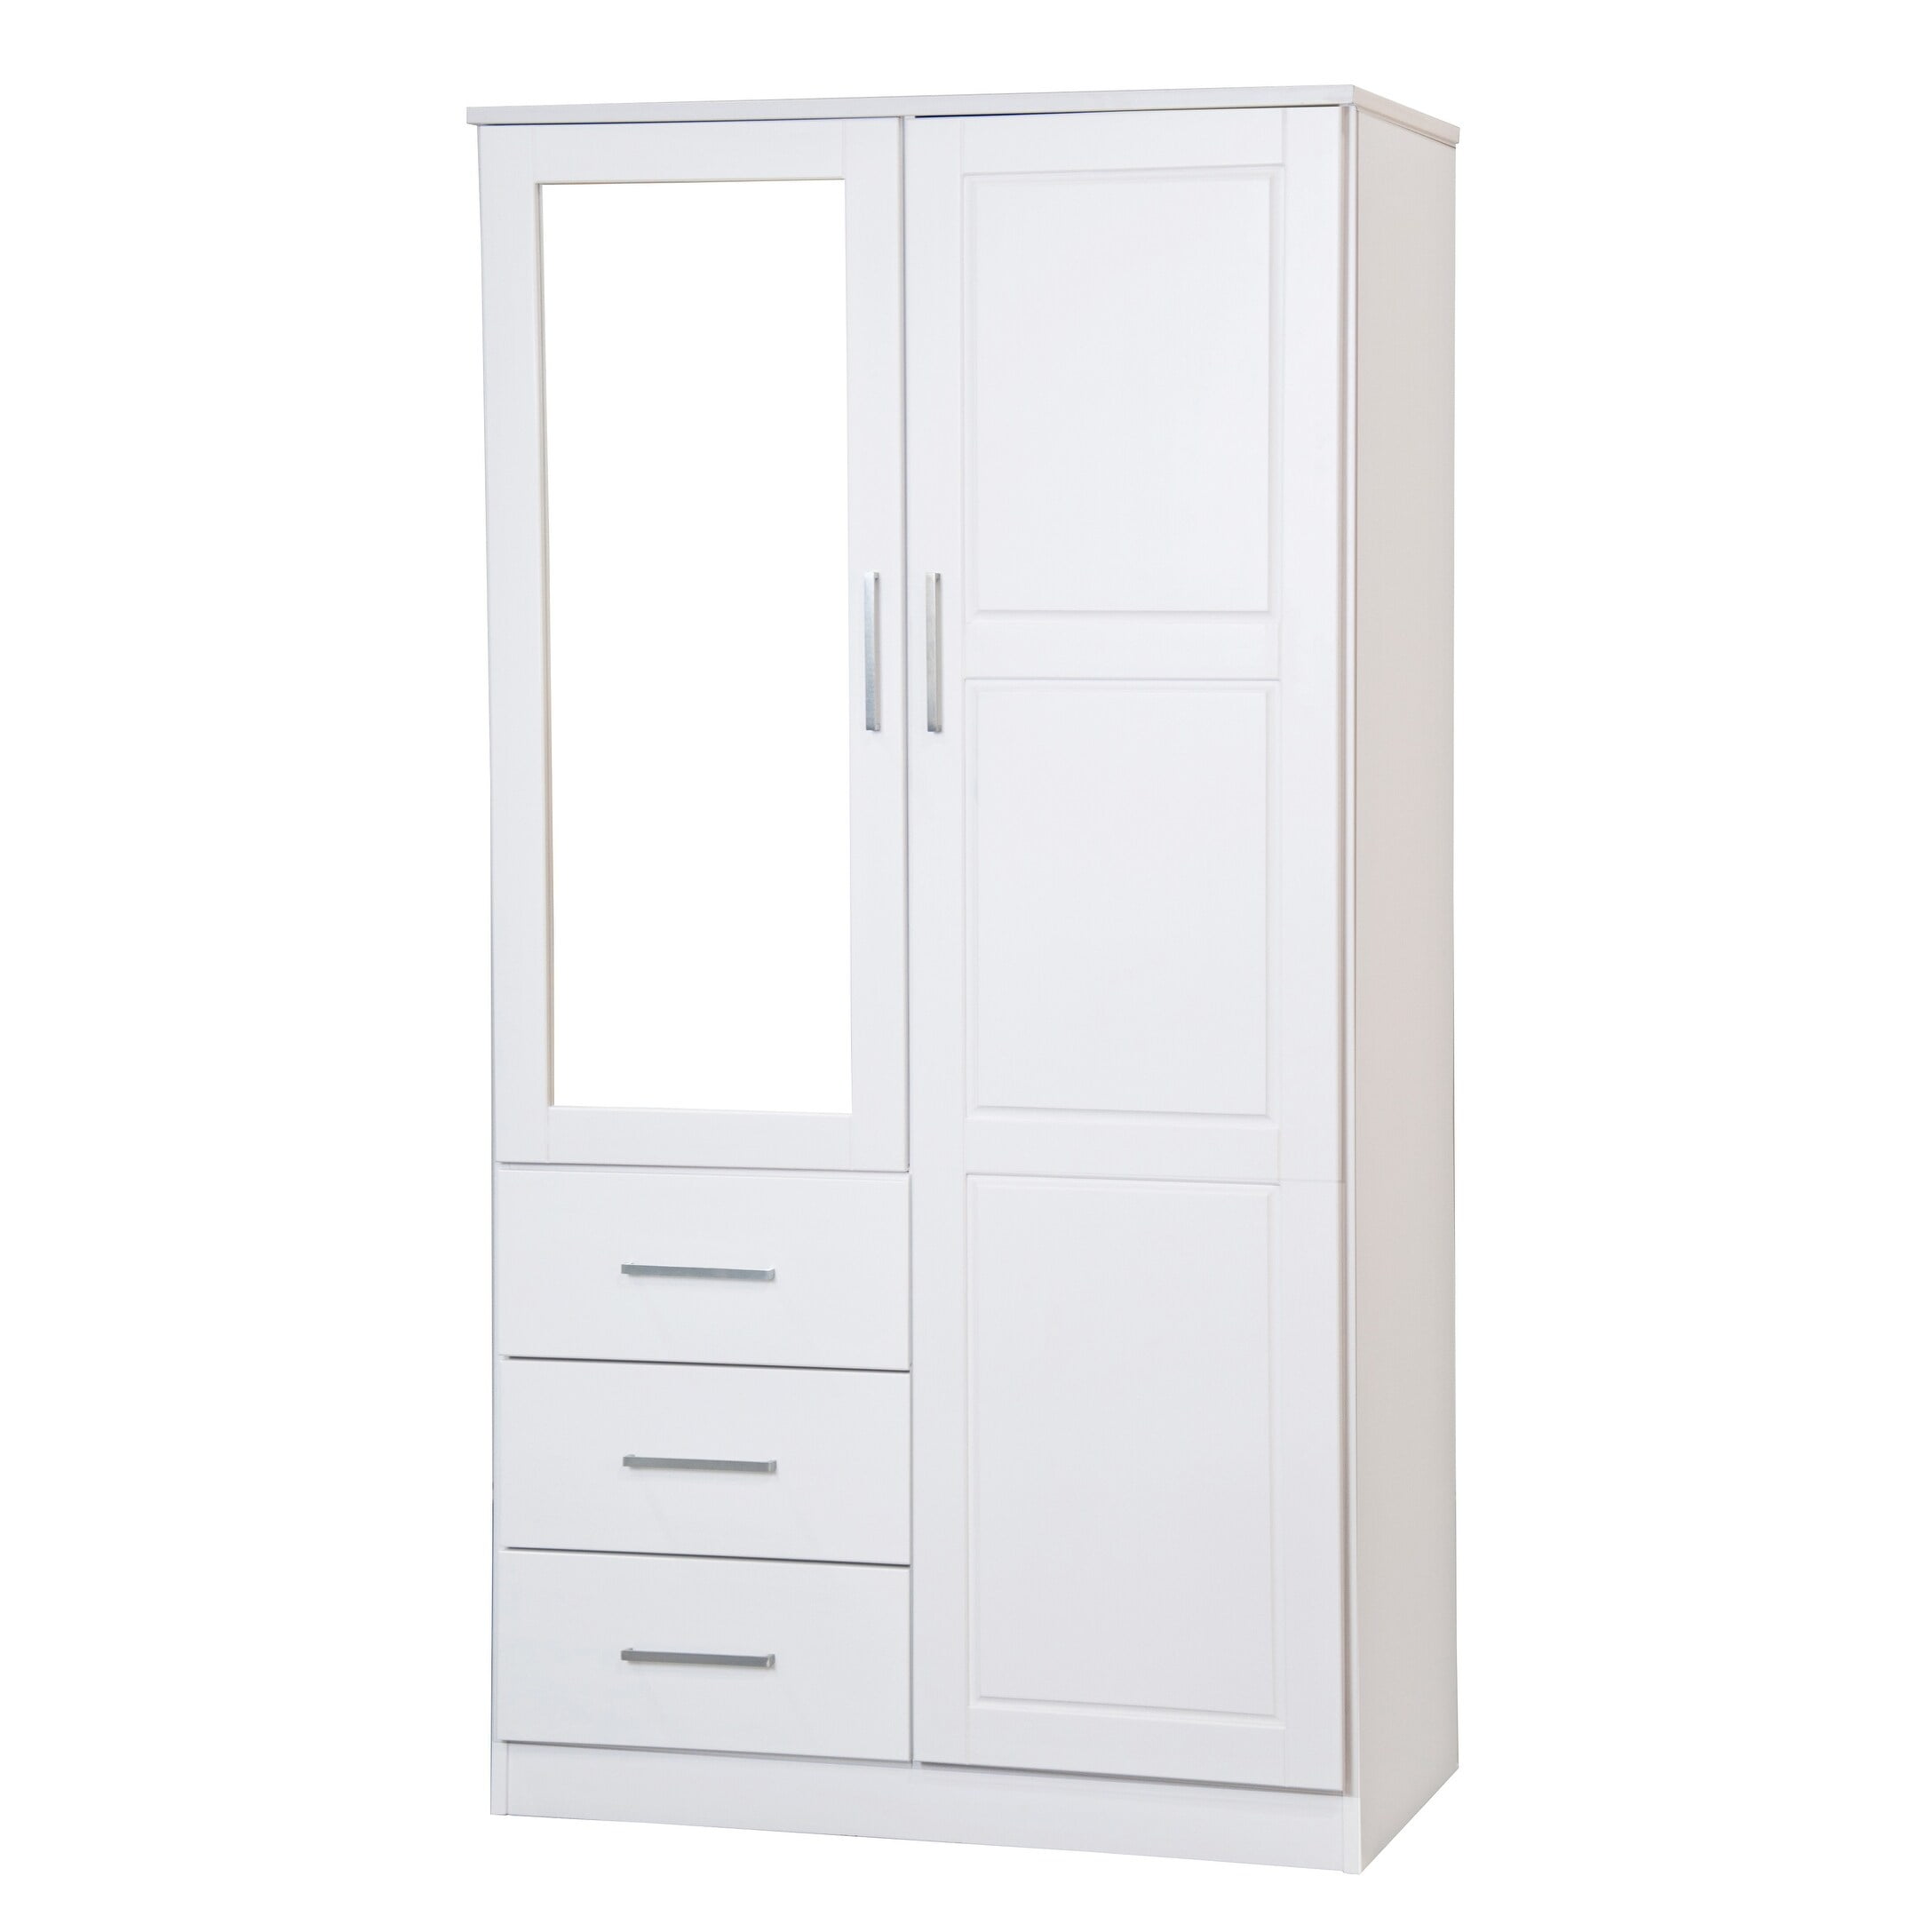 Palace Imports 100% Solid Wood Family Wardrobe Closet Armoire w/Clothing  Rods, White, 60.25 wx 72 hx 20.75 d. Renewable Eco-Friendly Wood, Made  in